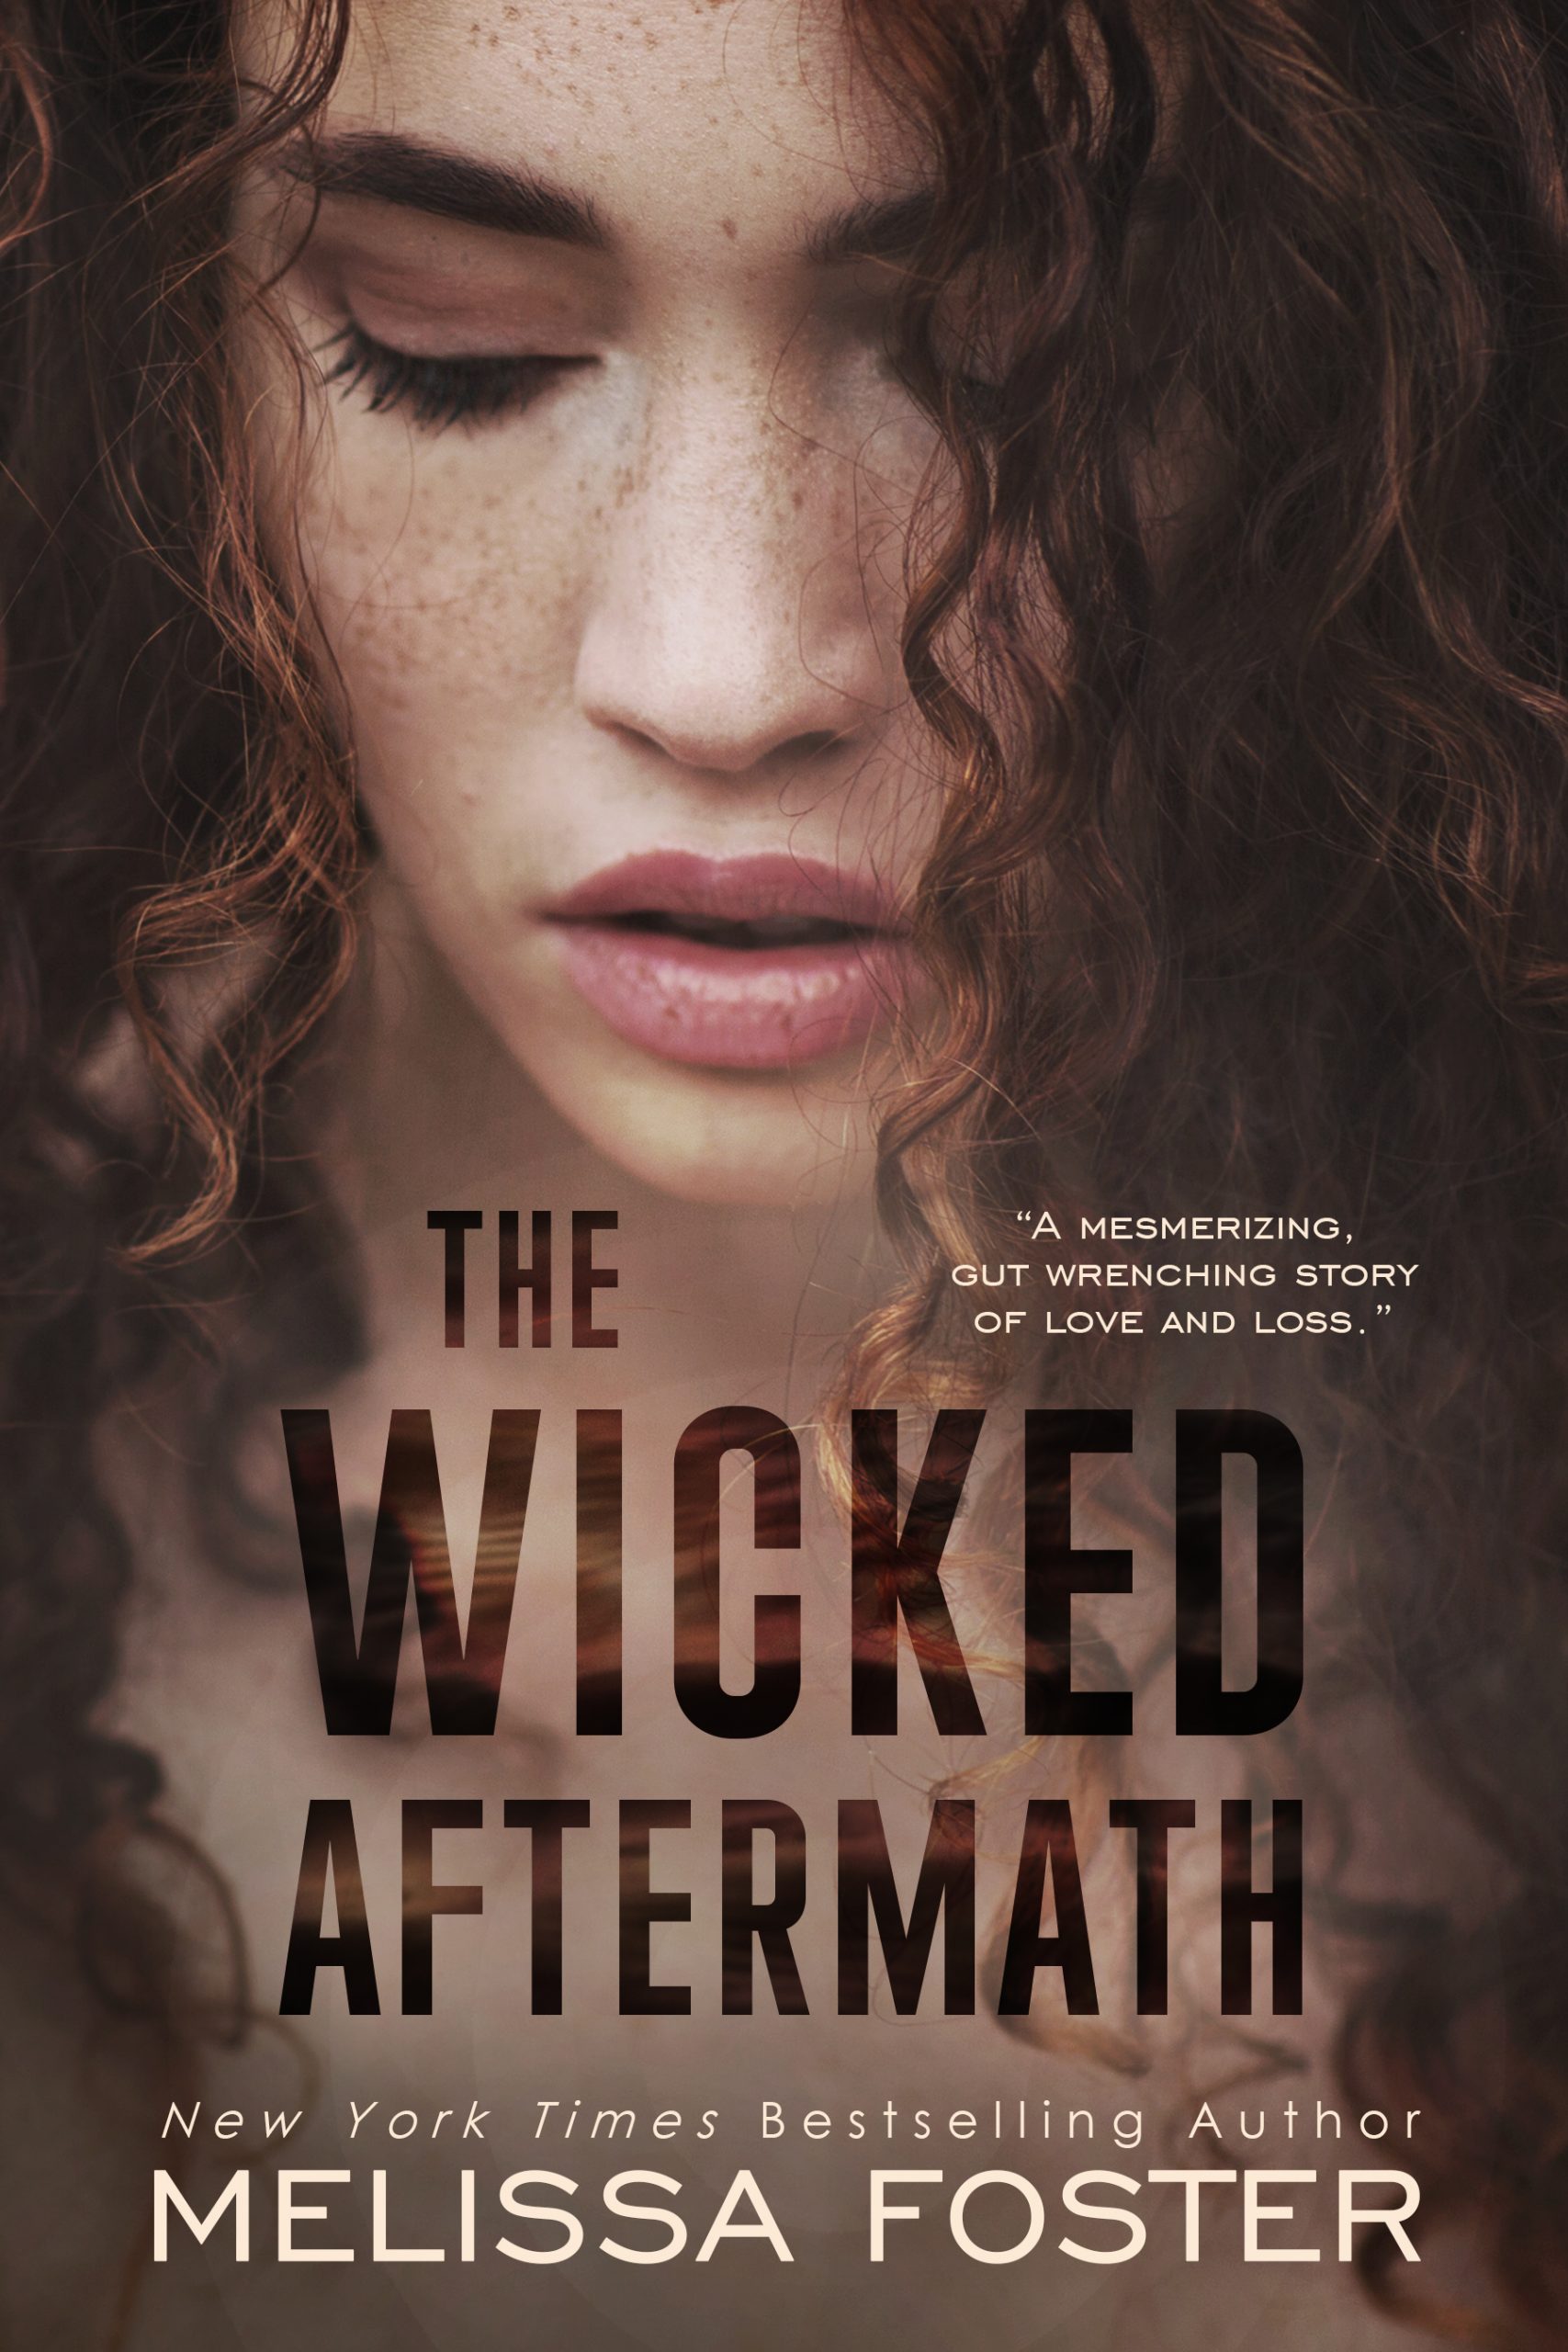 The Wicked Aftermath limited edition cover by Melissa Foster